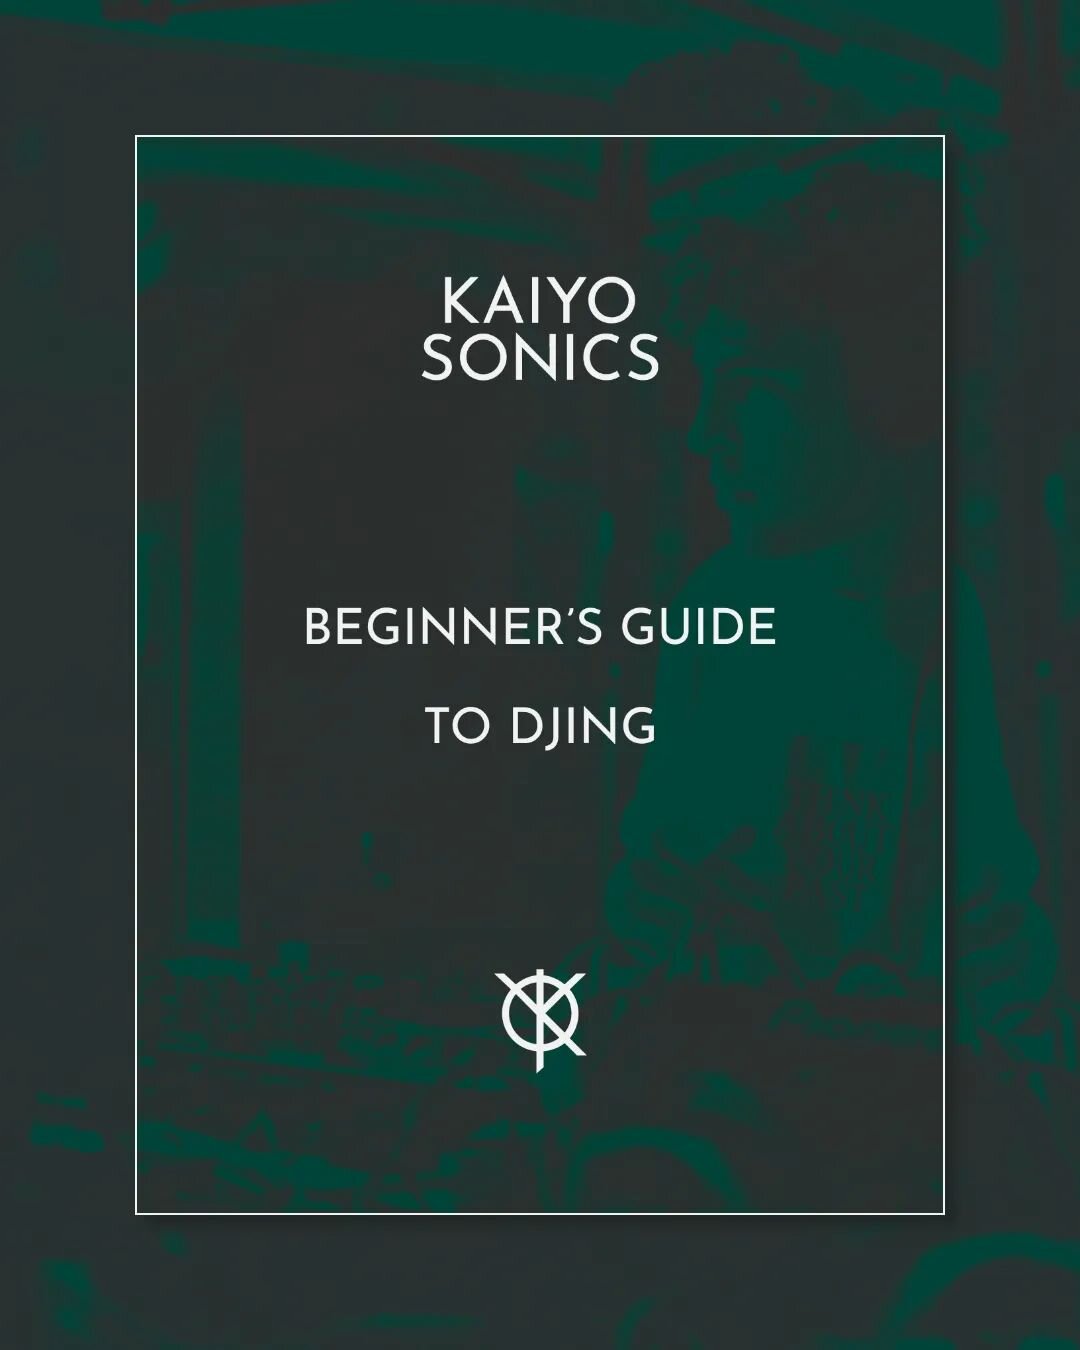 First 100 copies free! Use code 'KAIYOFREE' to grab your free copy. 🔗 in bio

Stoked to release the first edition of my Beginner's Guide To DJing eBook. It covers general info on equipment setup and where to find music, as well as a drum &amp; bass 